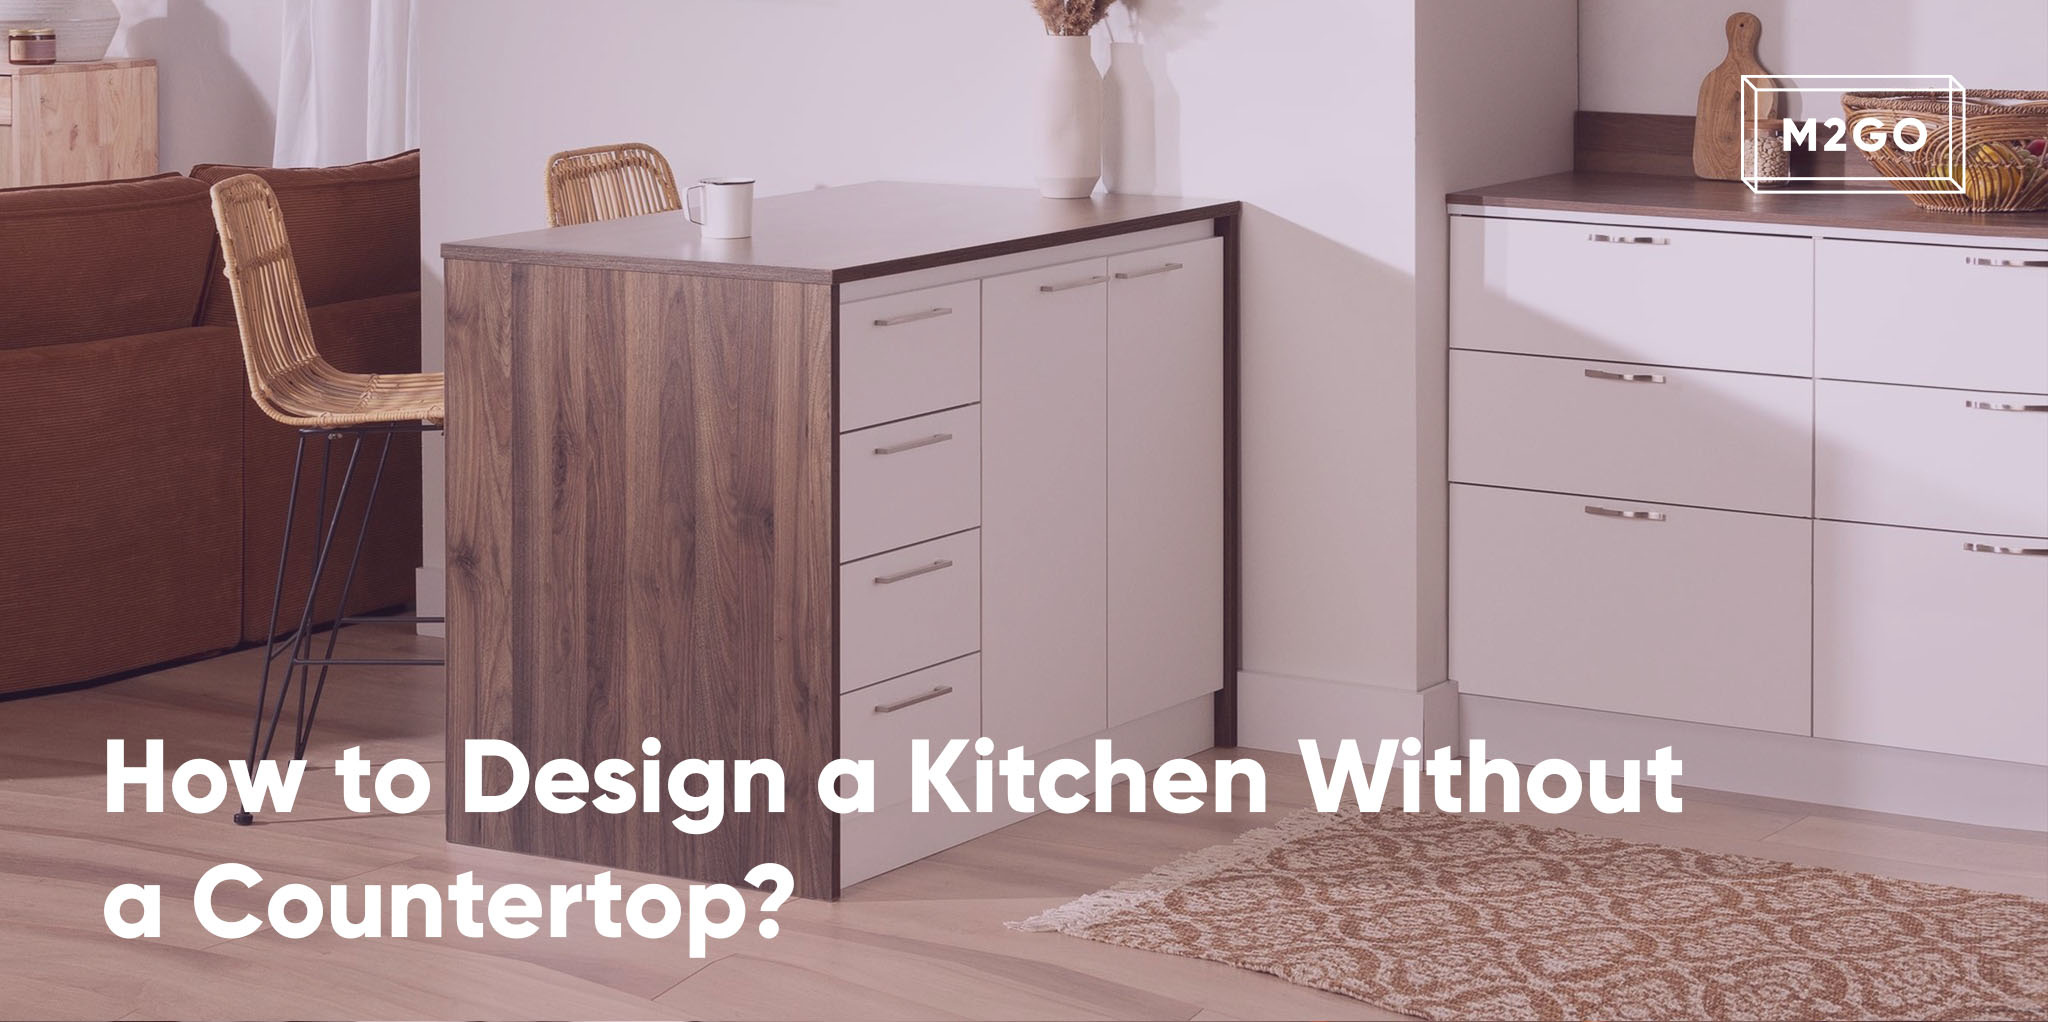 How to Design a Kitchen Without a Countertop?